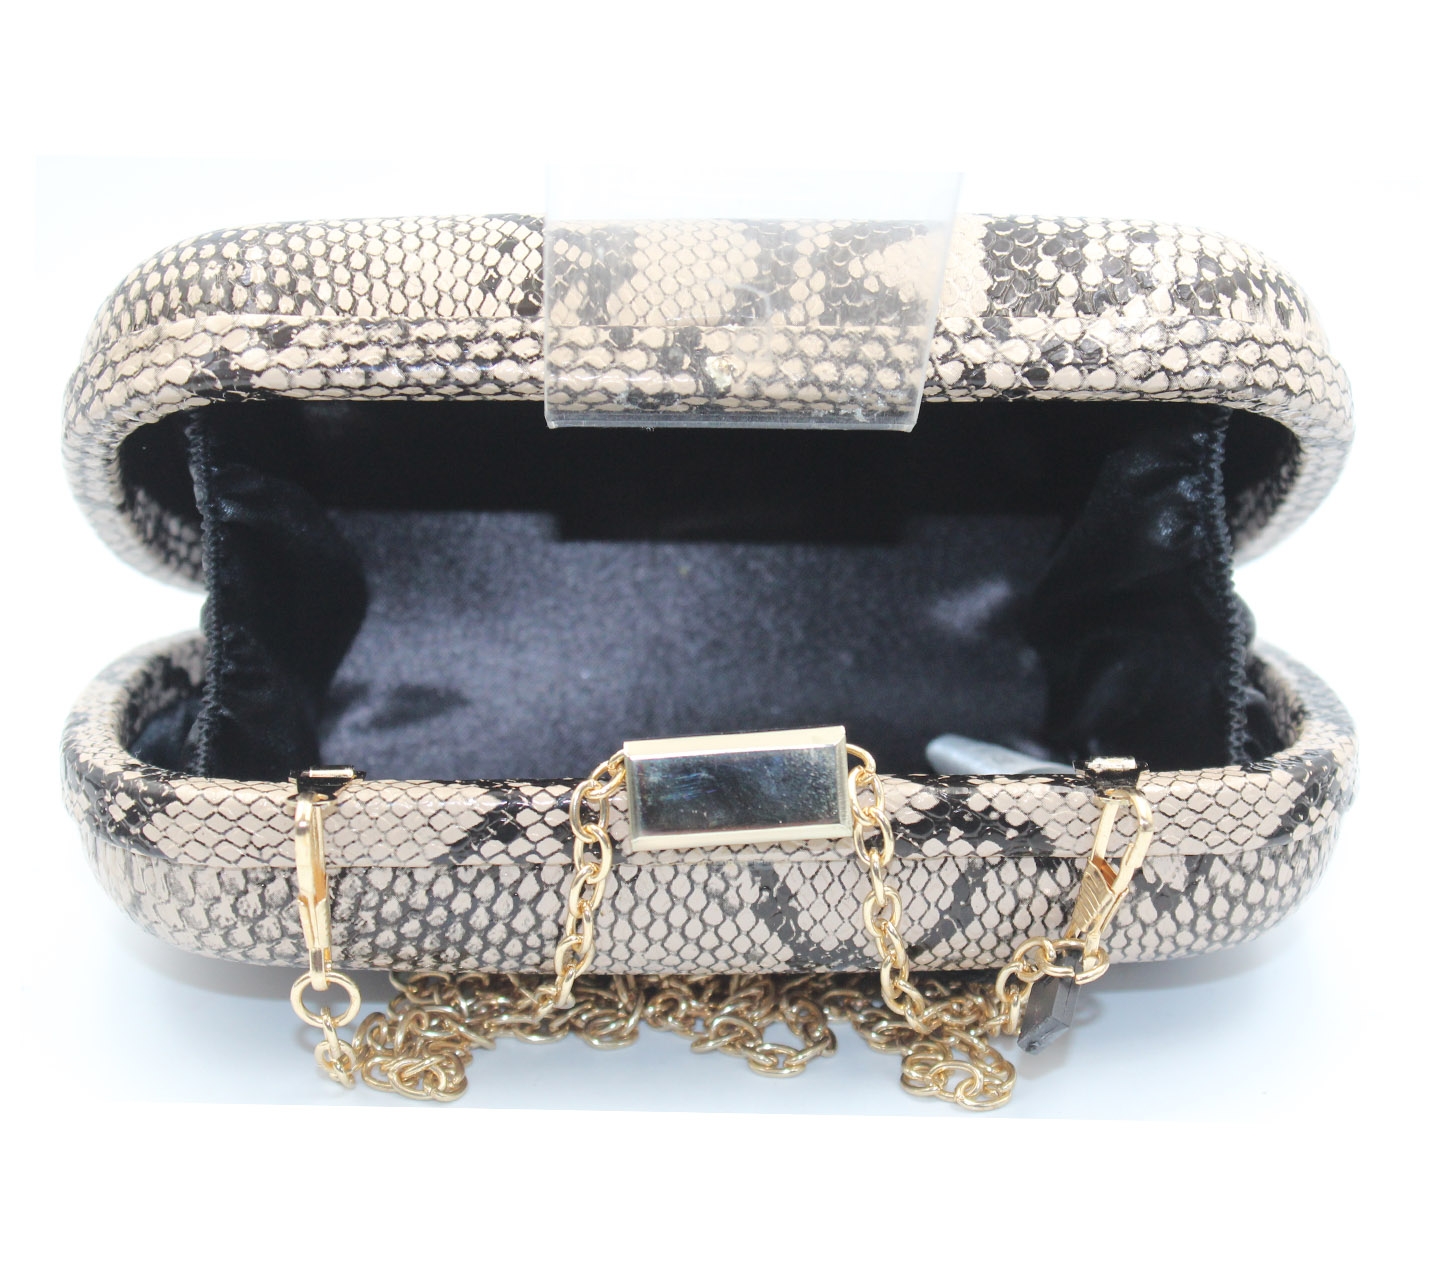 Mc Collection Nude Snakeskin Clutch